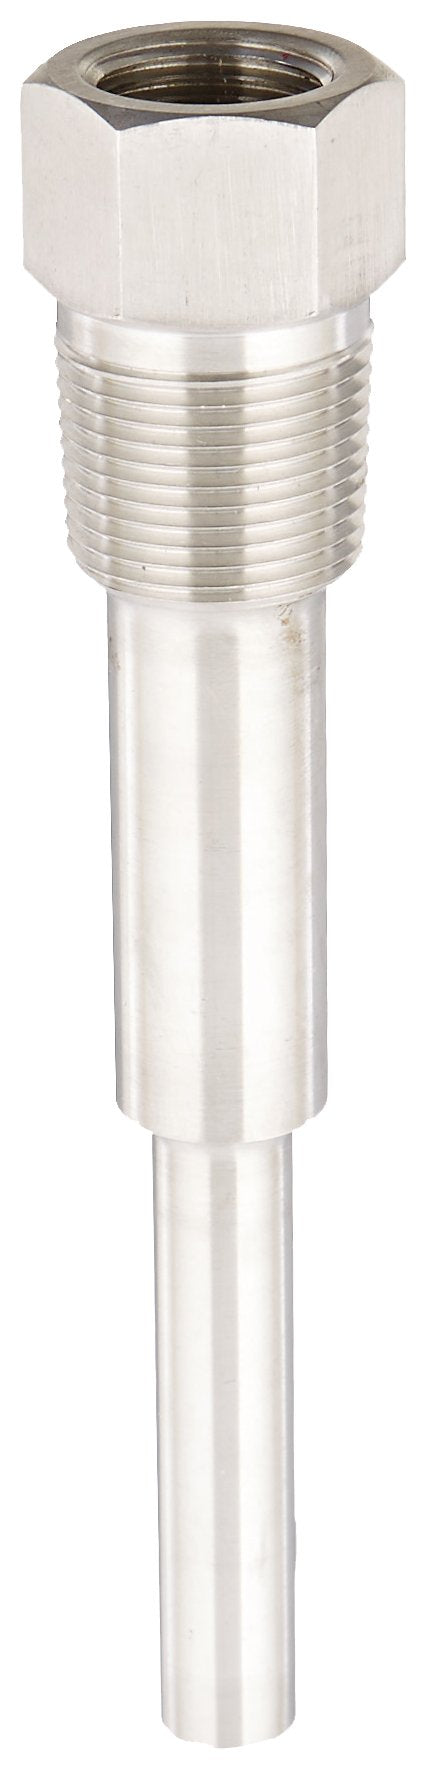 [Australia - AusPower] - PIC Gauge TW-SS06-23S2 6" Stem Length, 1/2" NPT x 3/4" NPT Connection Size, Stepped Style, 0.260" Bore Diameter, 316 Stainless Steel Standard Thermowell for Industrial Bimetal Thermometers 